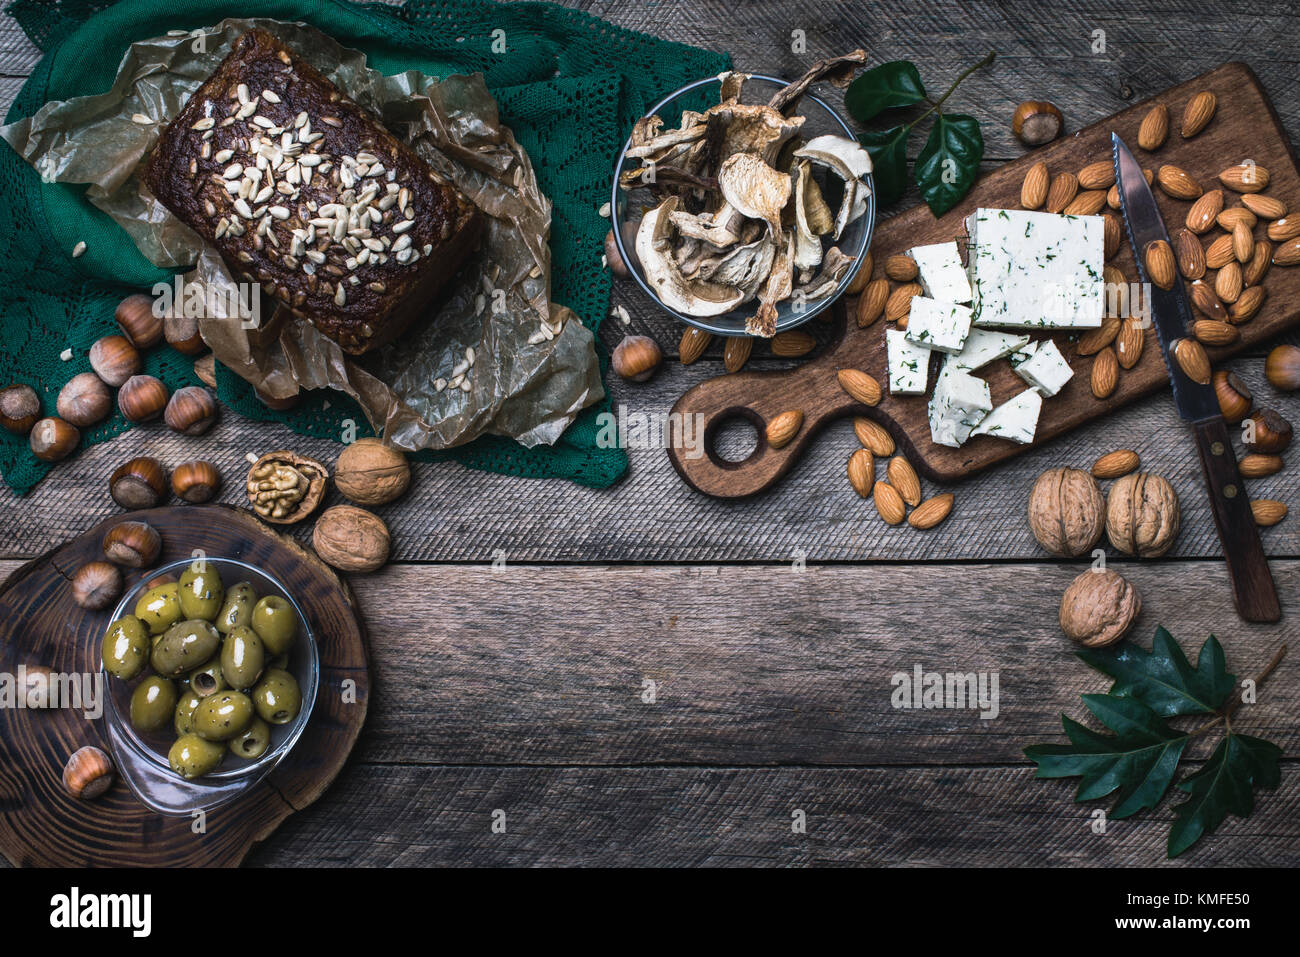 Rustic style olives, nuts mushrooms  and bread  with seeds on wood Stock Photo